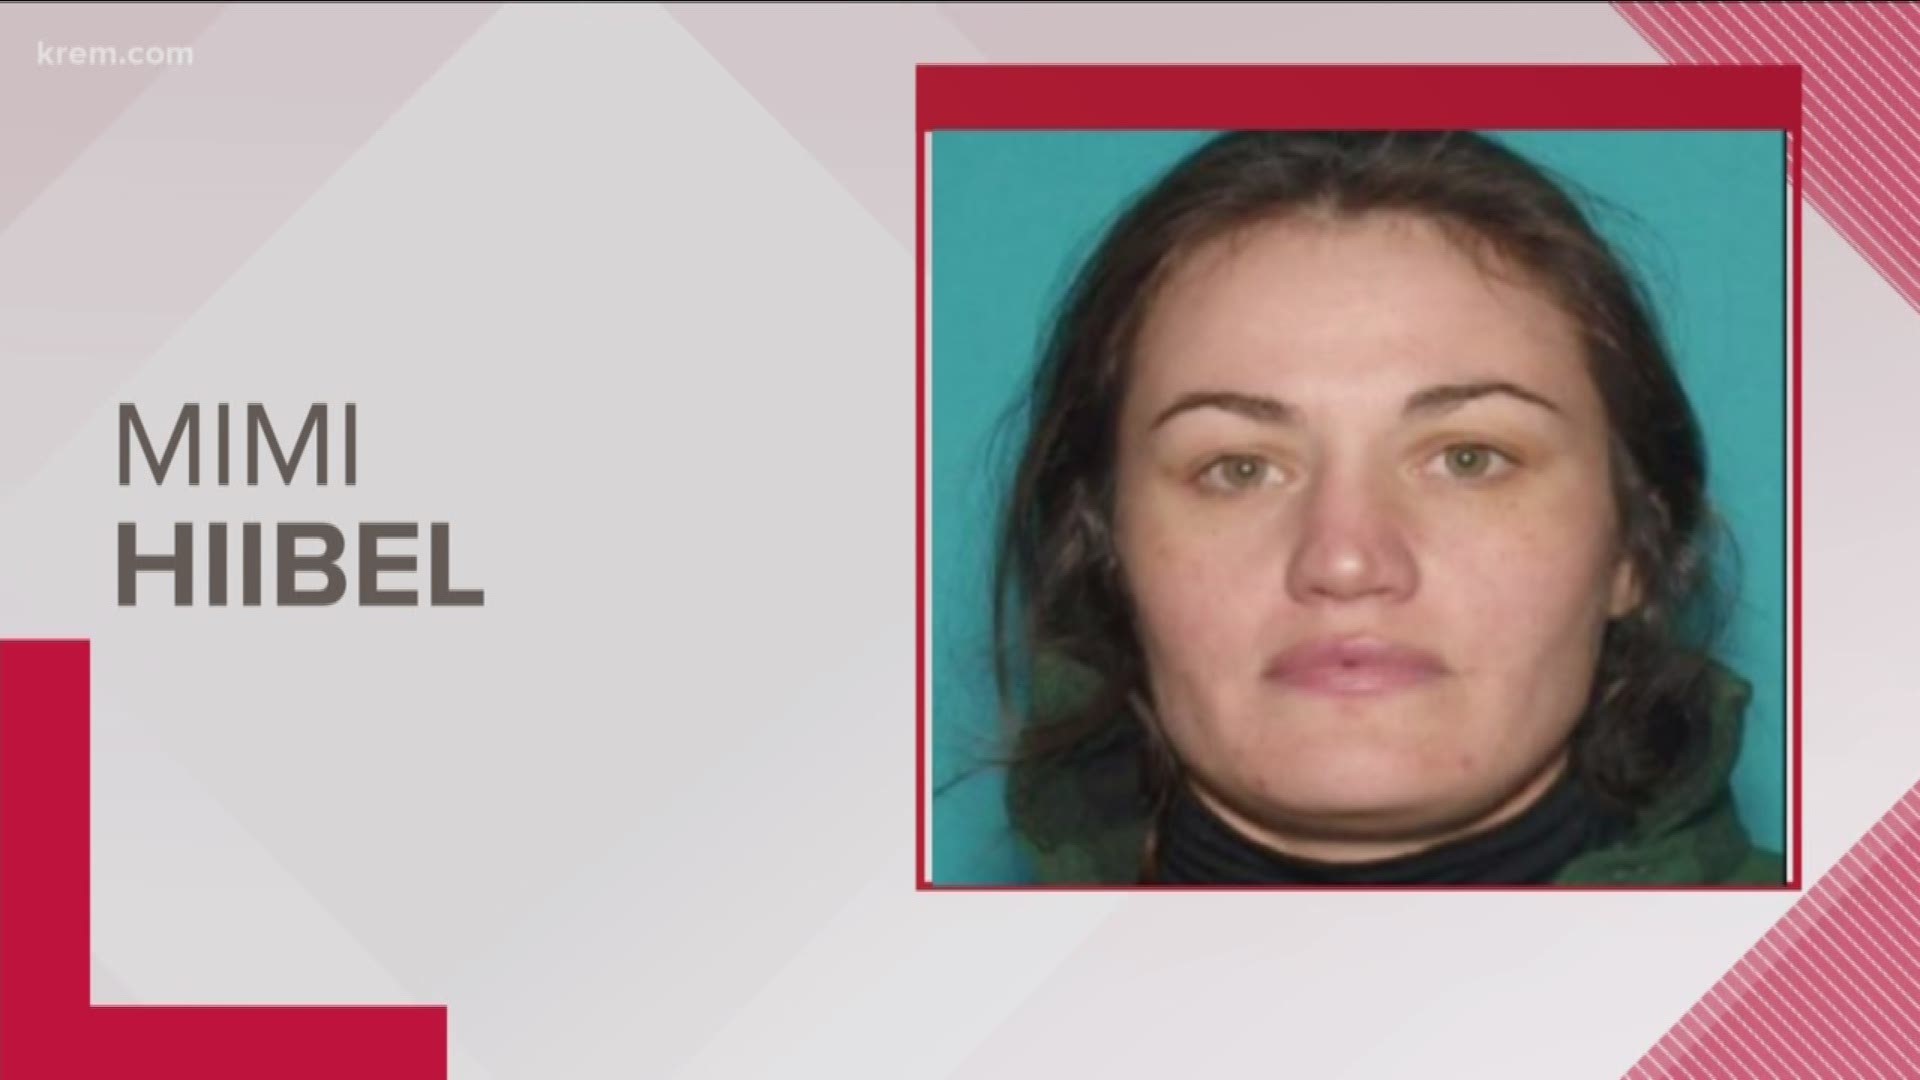 Mimi Hiibel was arrested by the FBI after she and her two sons were found safe in Lawrence, Kansas.